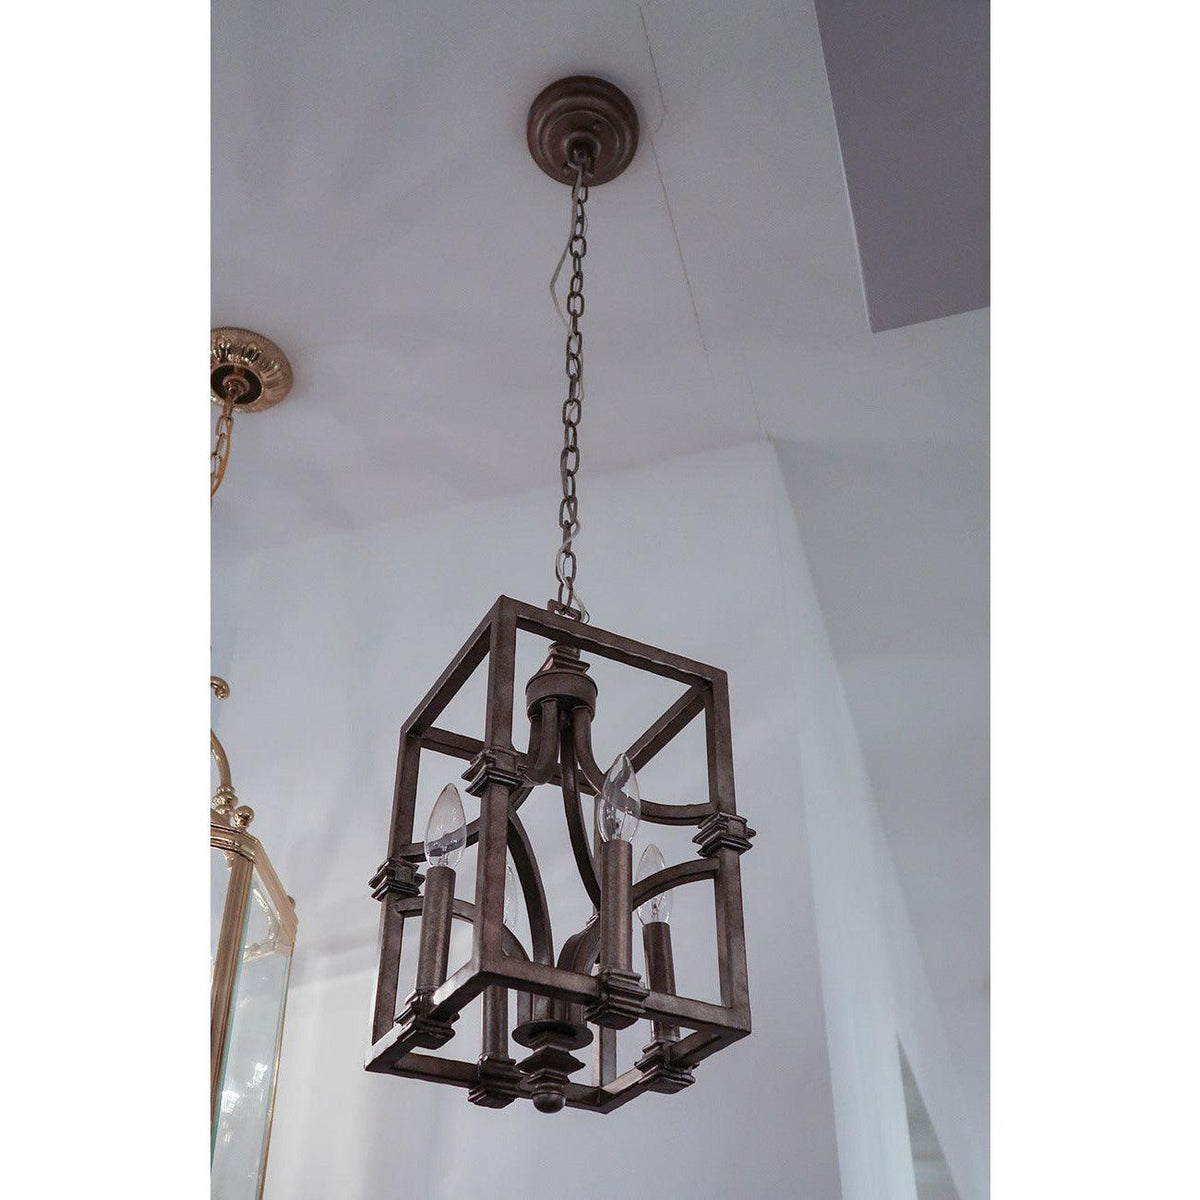 Montreal Lighting & Hardware - Structure Four Light Foyer Pendant by Savoy House | OPEN BOX - 3-4302-4-242-OS | Montreal Lighting & Hardware